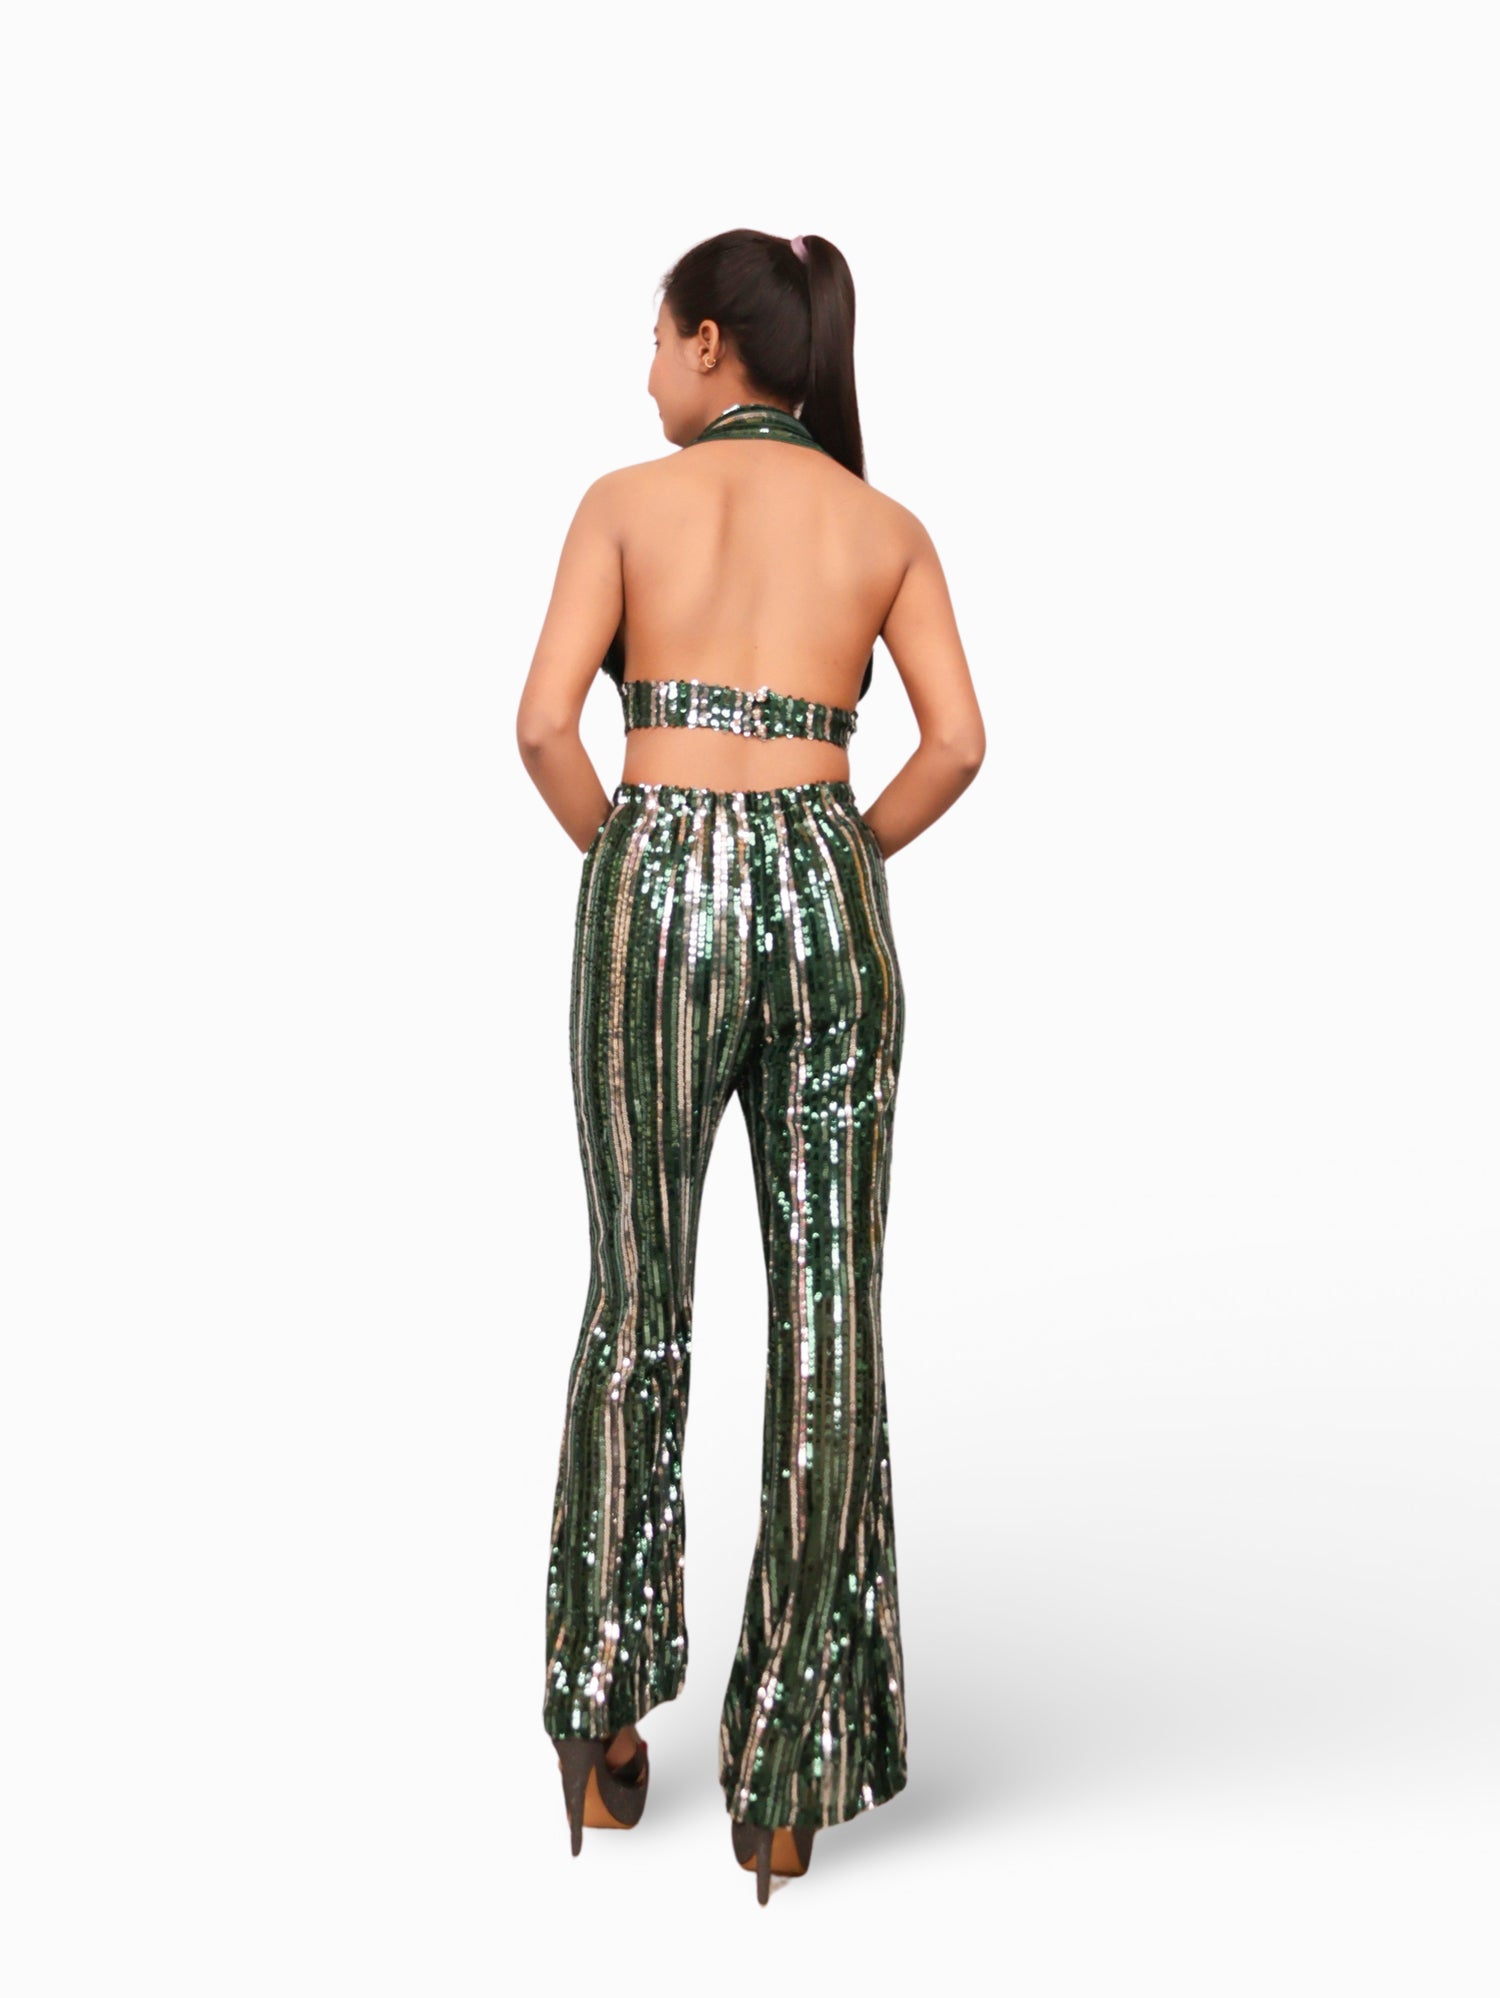 Glamour Halter Neck Sequins Bodycon Co-Ord Set by Shreekama Dark Green Dress for Party Festival Wedding Occasion in Noida